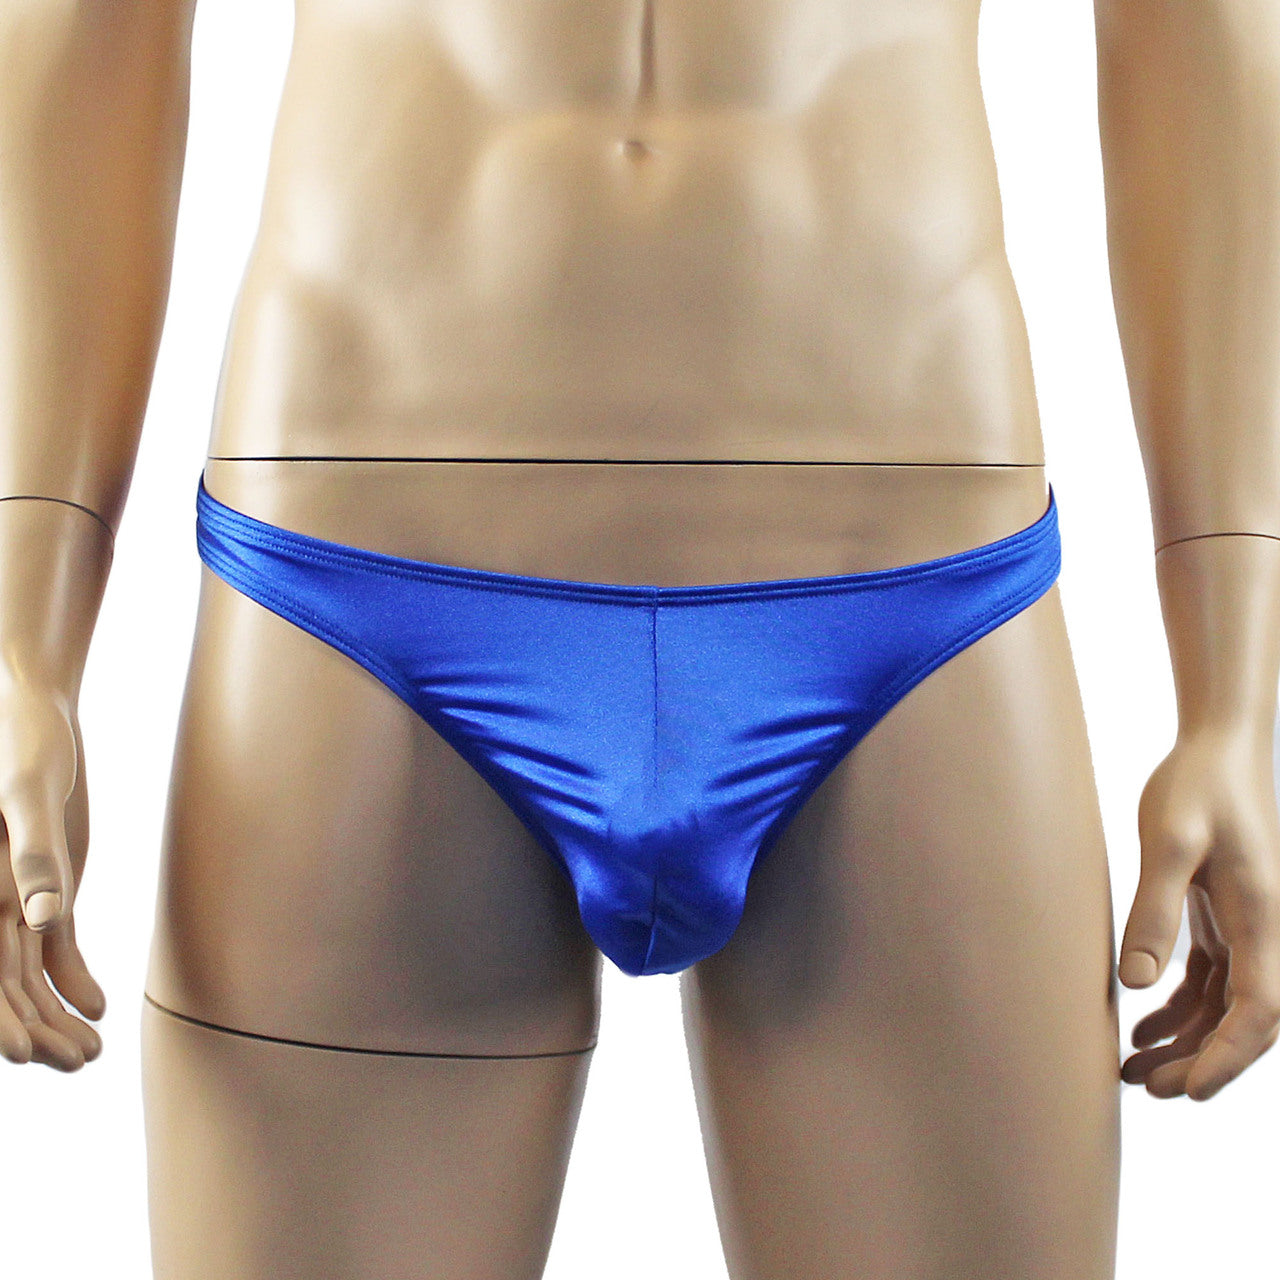 Mens Jenny Silky Satin Bra Top and Thong Lingerie (blue plus other colours)